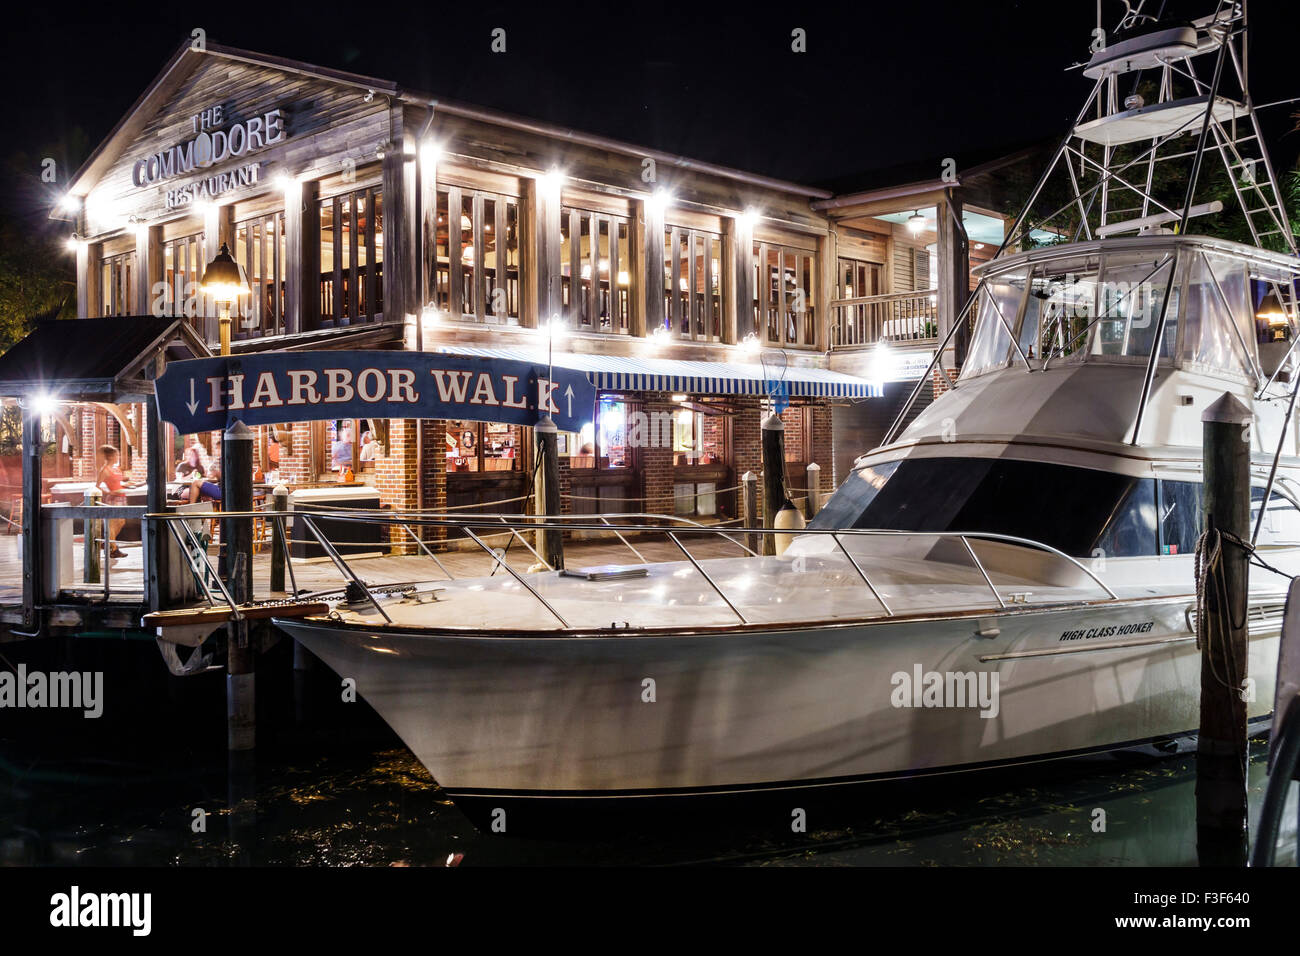 Key West Florida Keys,Old Town,Harbor Walk,harbour,bight,night evening,yacht,boat,The Commodore,restaurant restaurants food dining cafe cafes,FL150508 Stock Photo